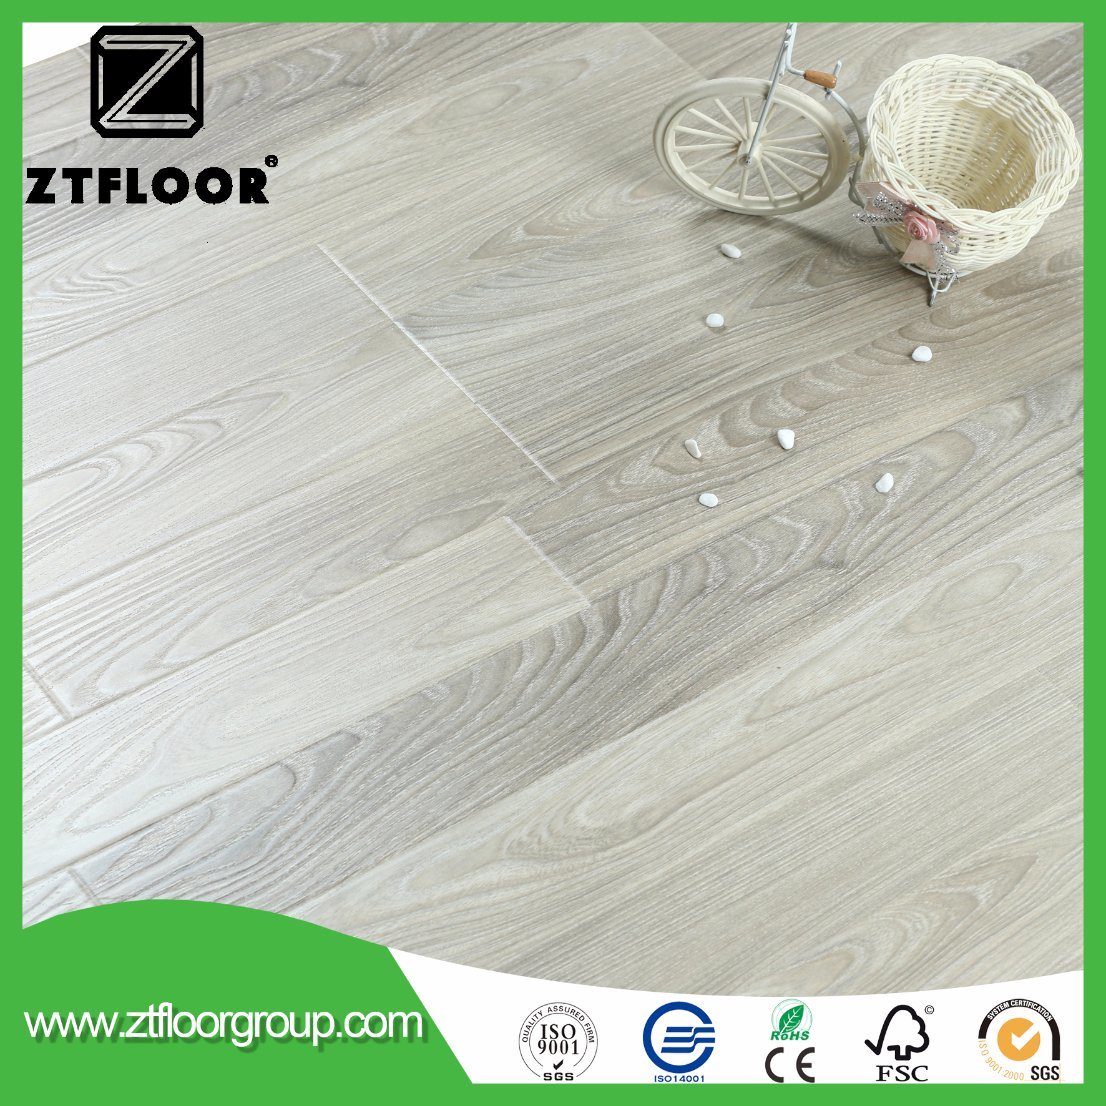 Decoration Material Waterproof Embossment Laminated Flooring Tile with Unilin Click